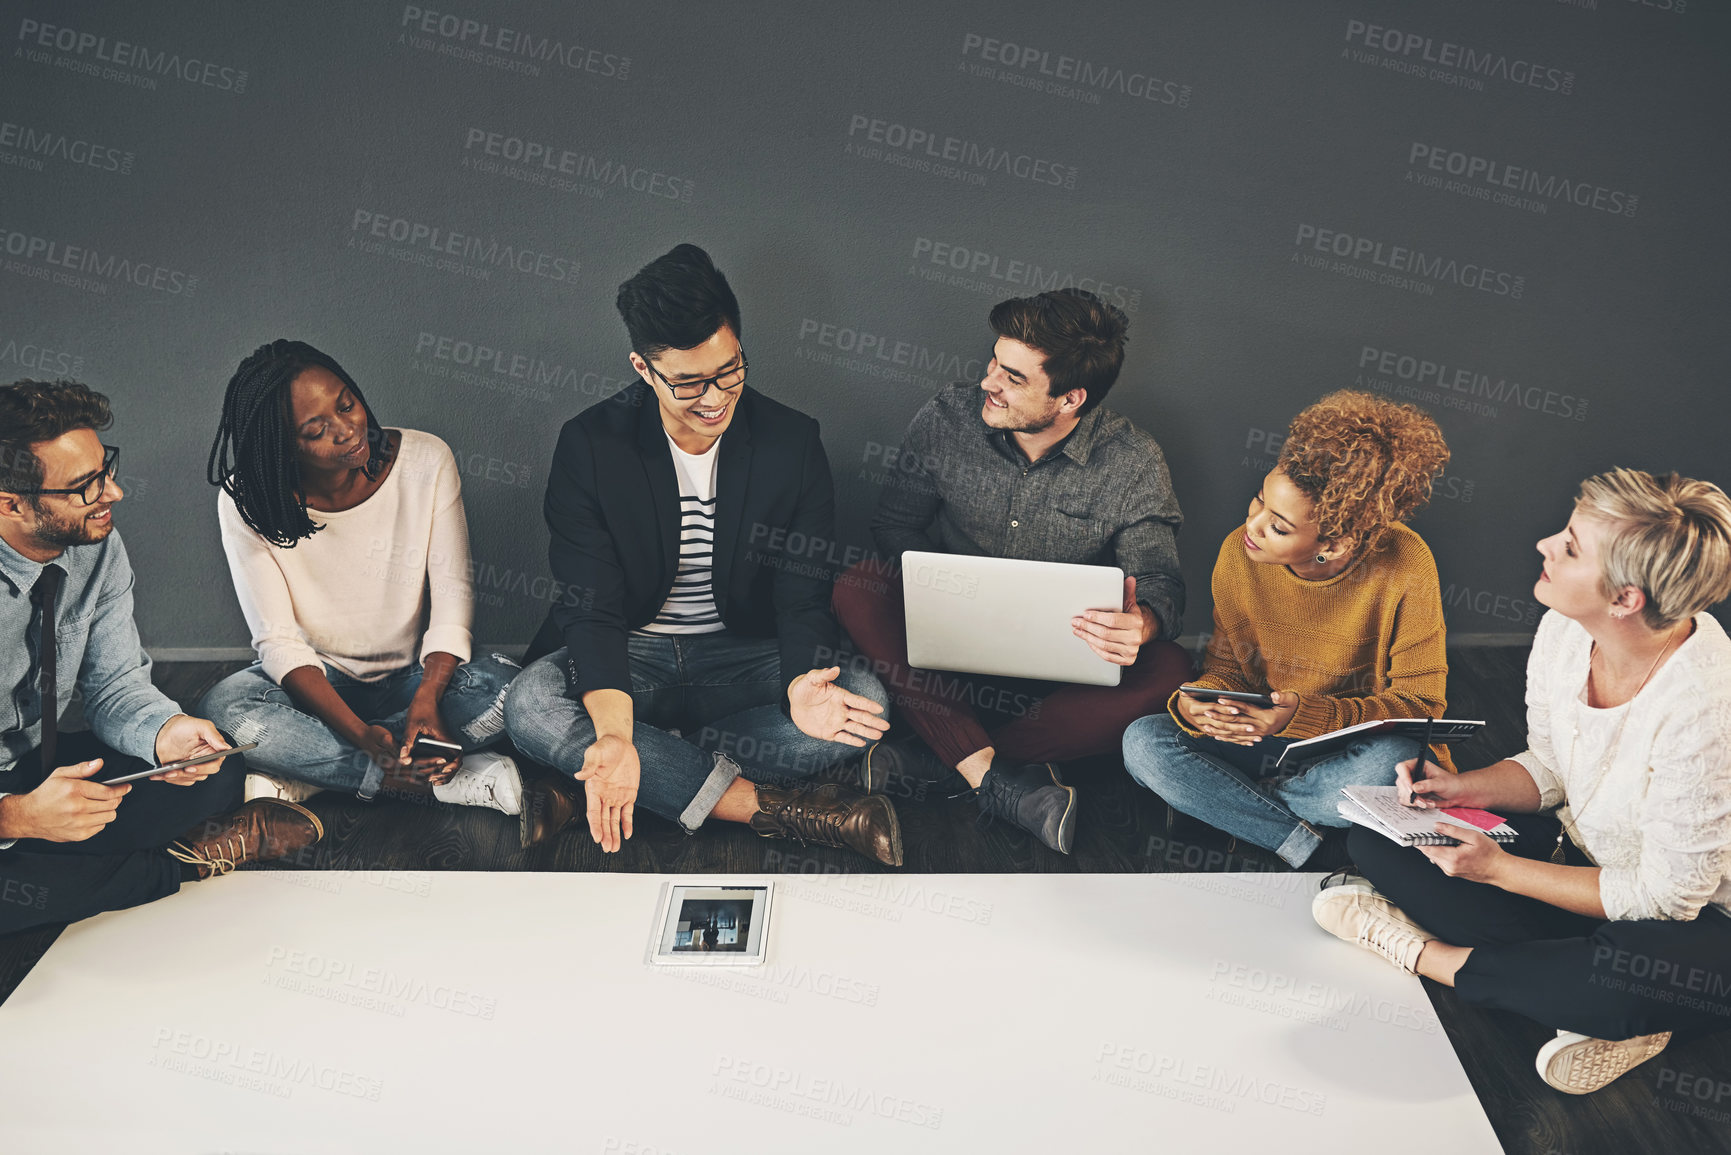 Buy stock photo Studio shot of a diverse group of creative employees having a meeting inside